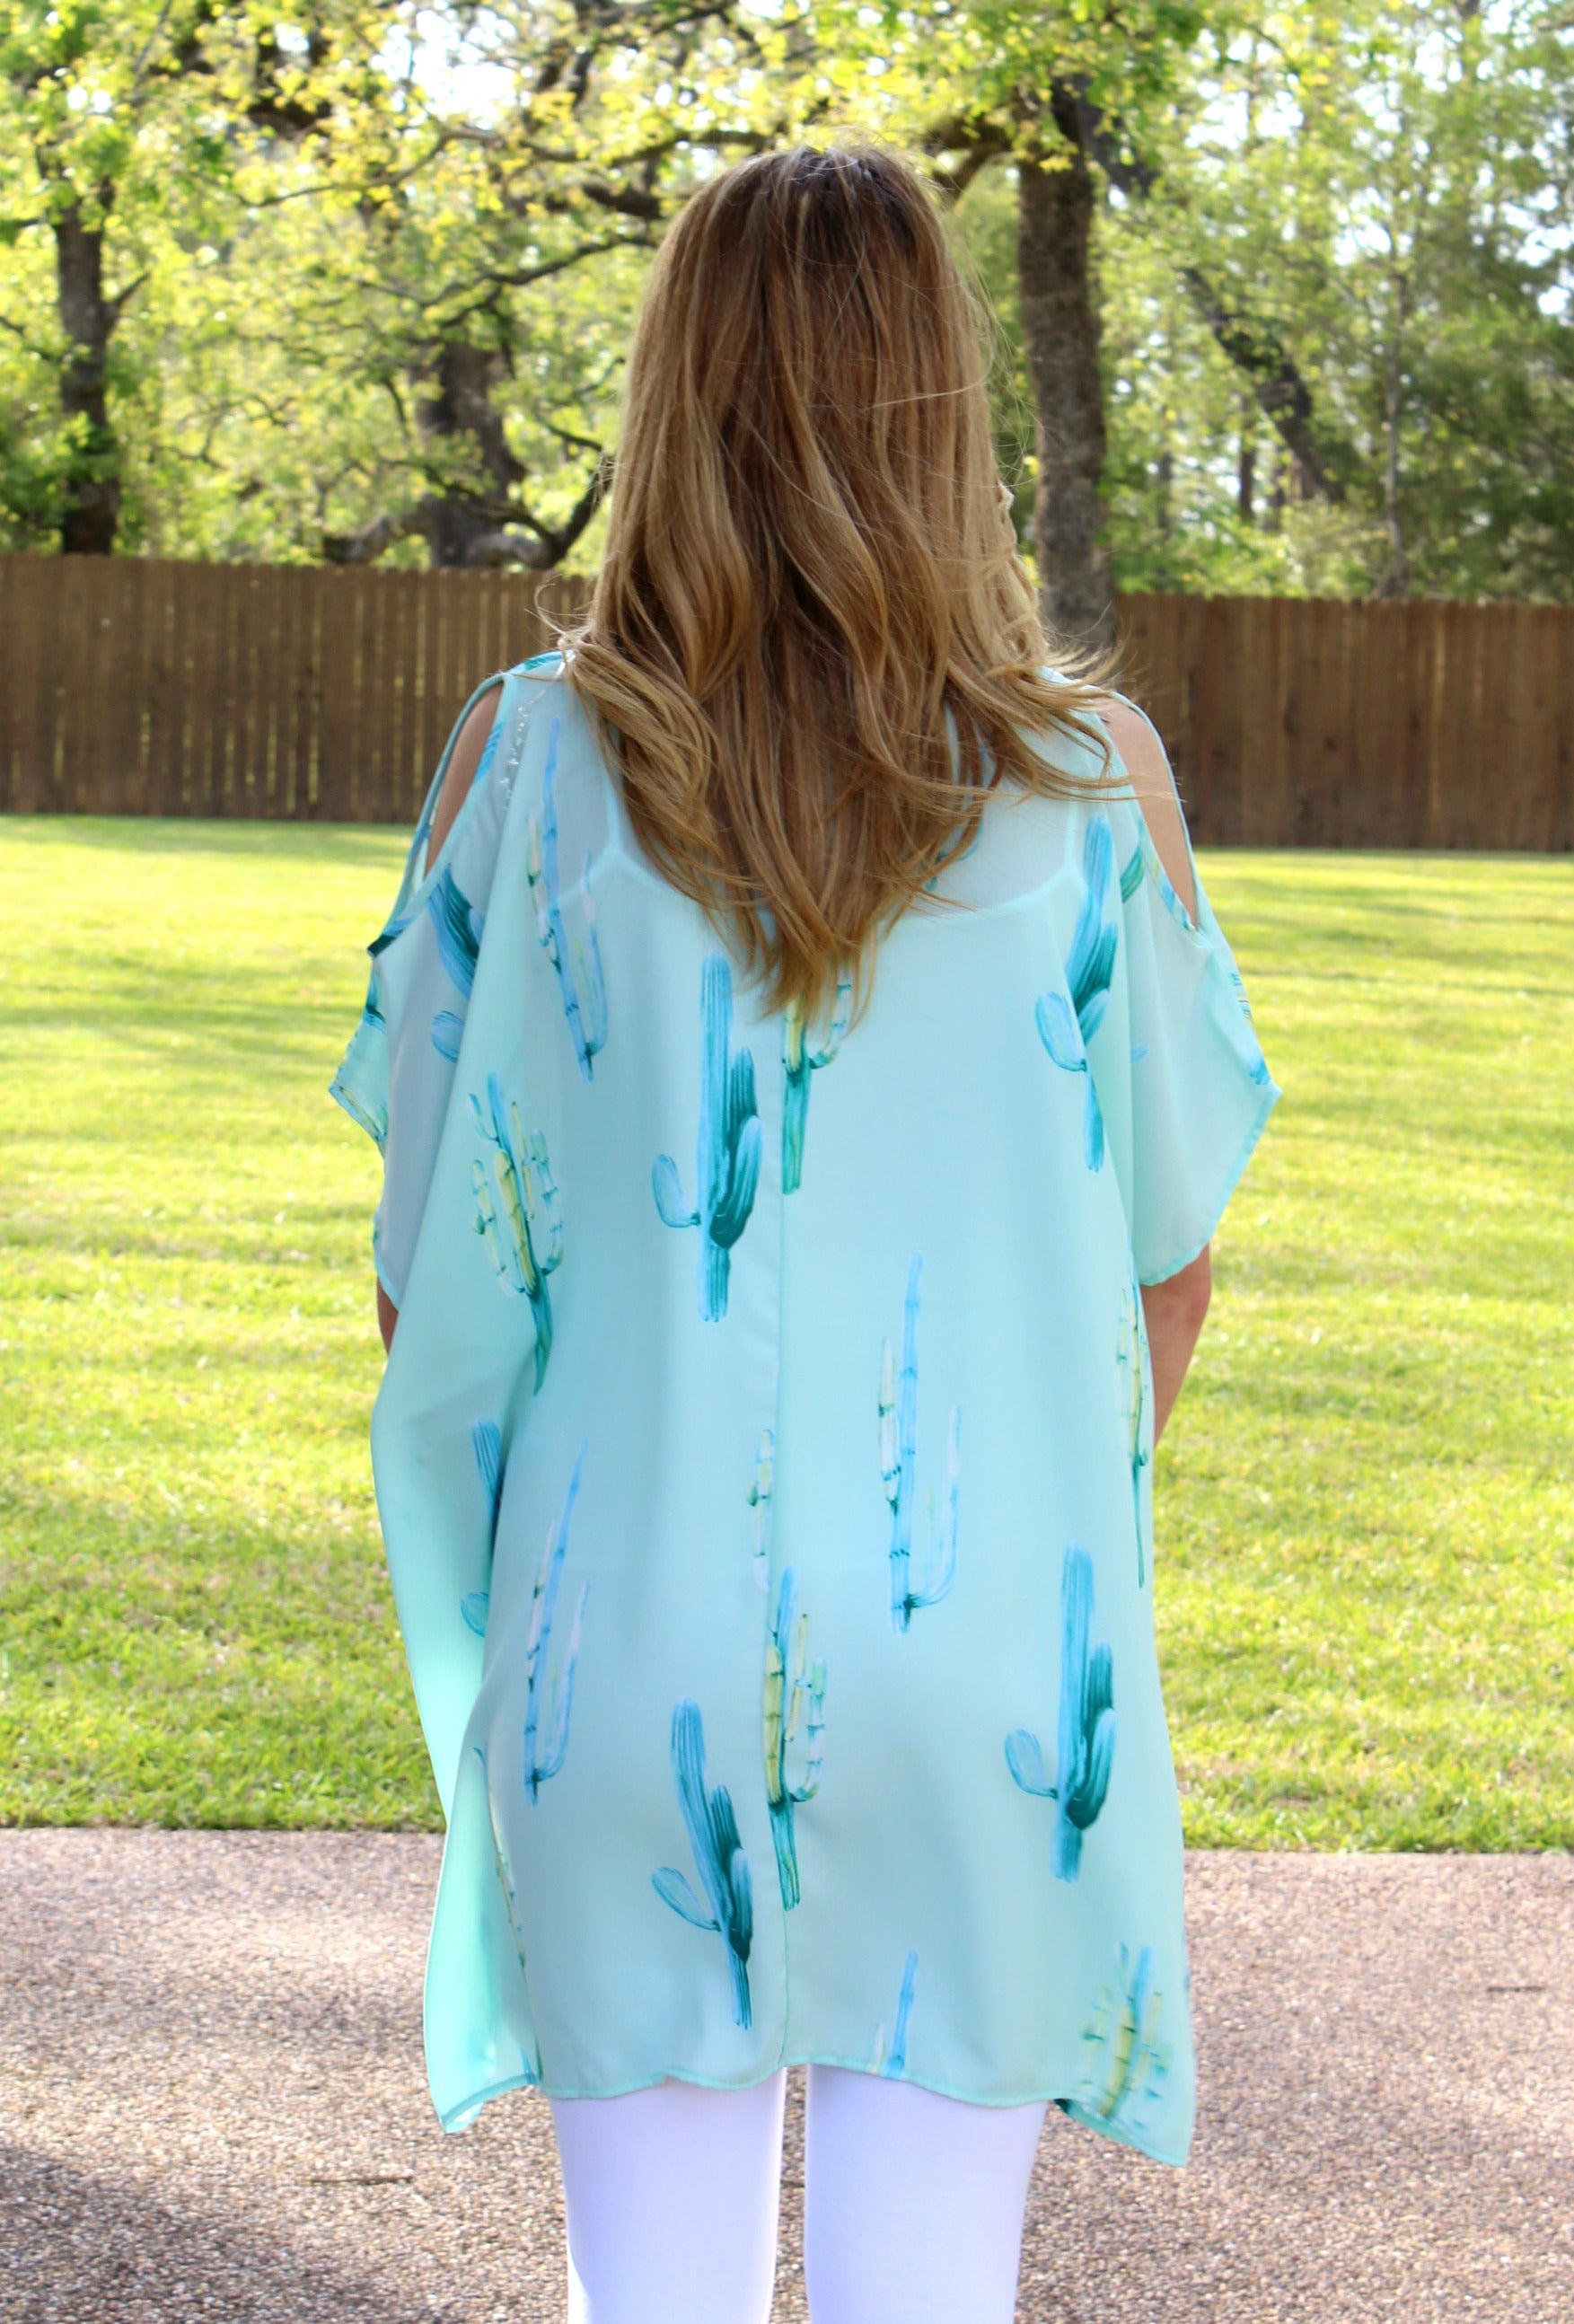 Pretty Little Thing Cactus Sheer Open Shoulder Tunic in Mint - Giddy Up Glamour Boutique